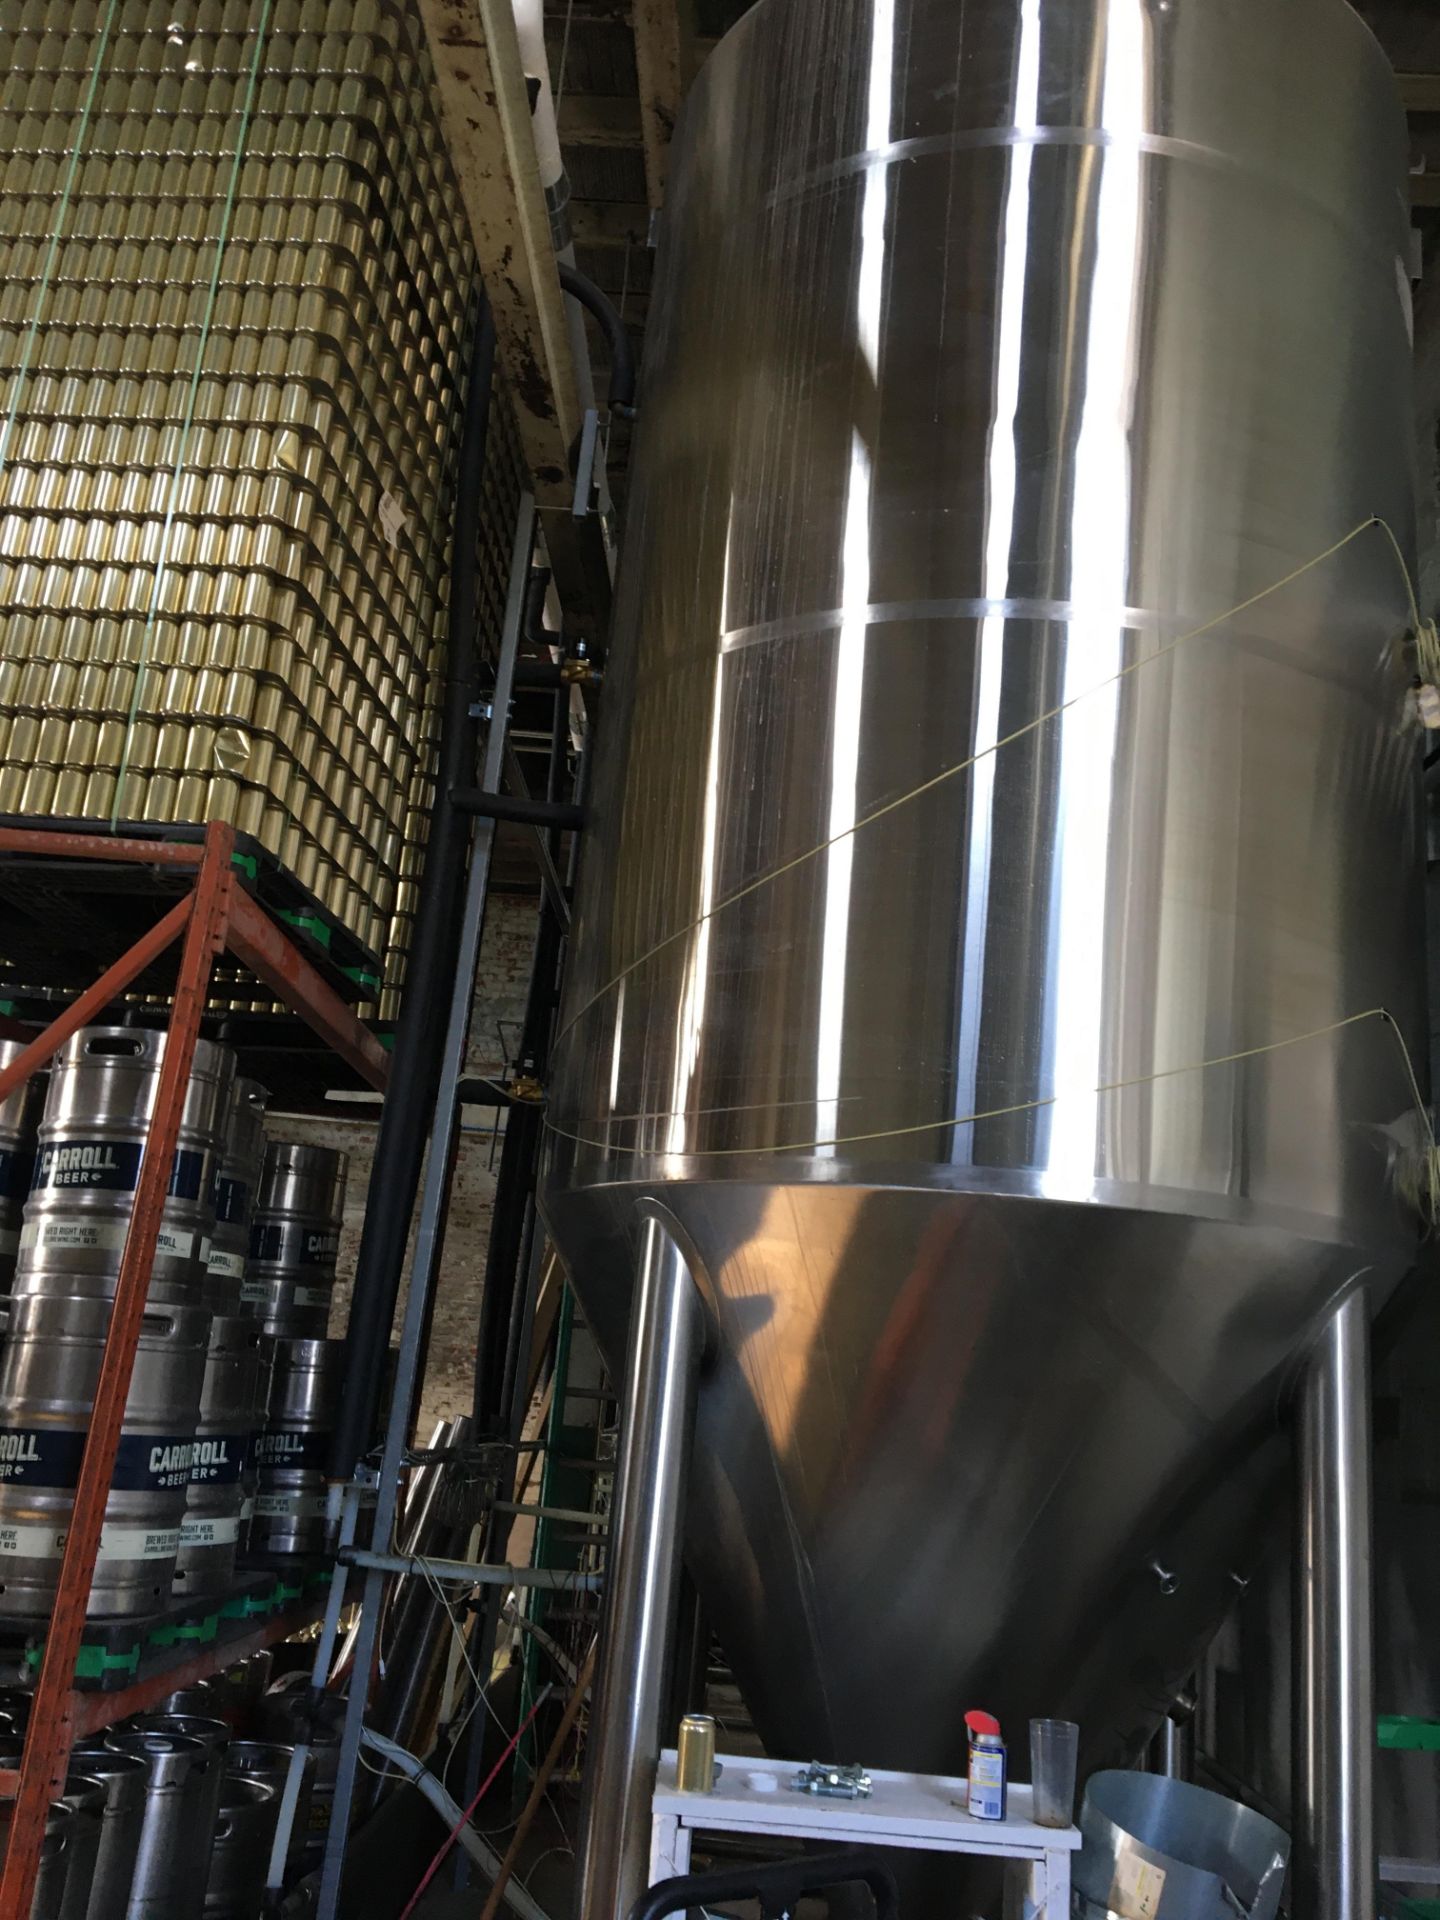 80-BBL Minnetonka Fermentation Tank, Model 80-BBL, Year 2017, Stainless Steel; Vessel store wort and - Image 4 of 9